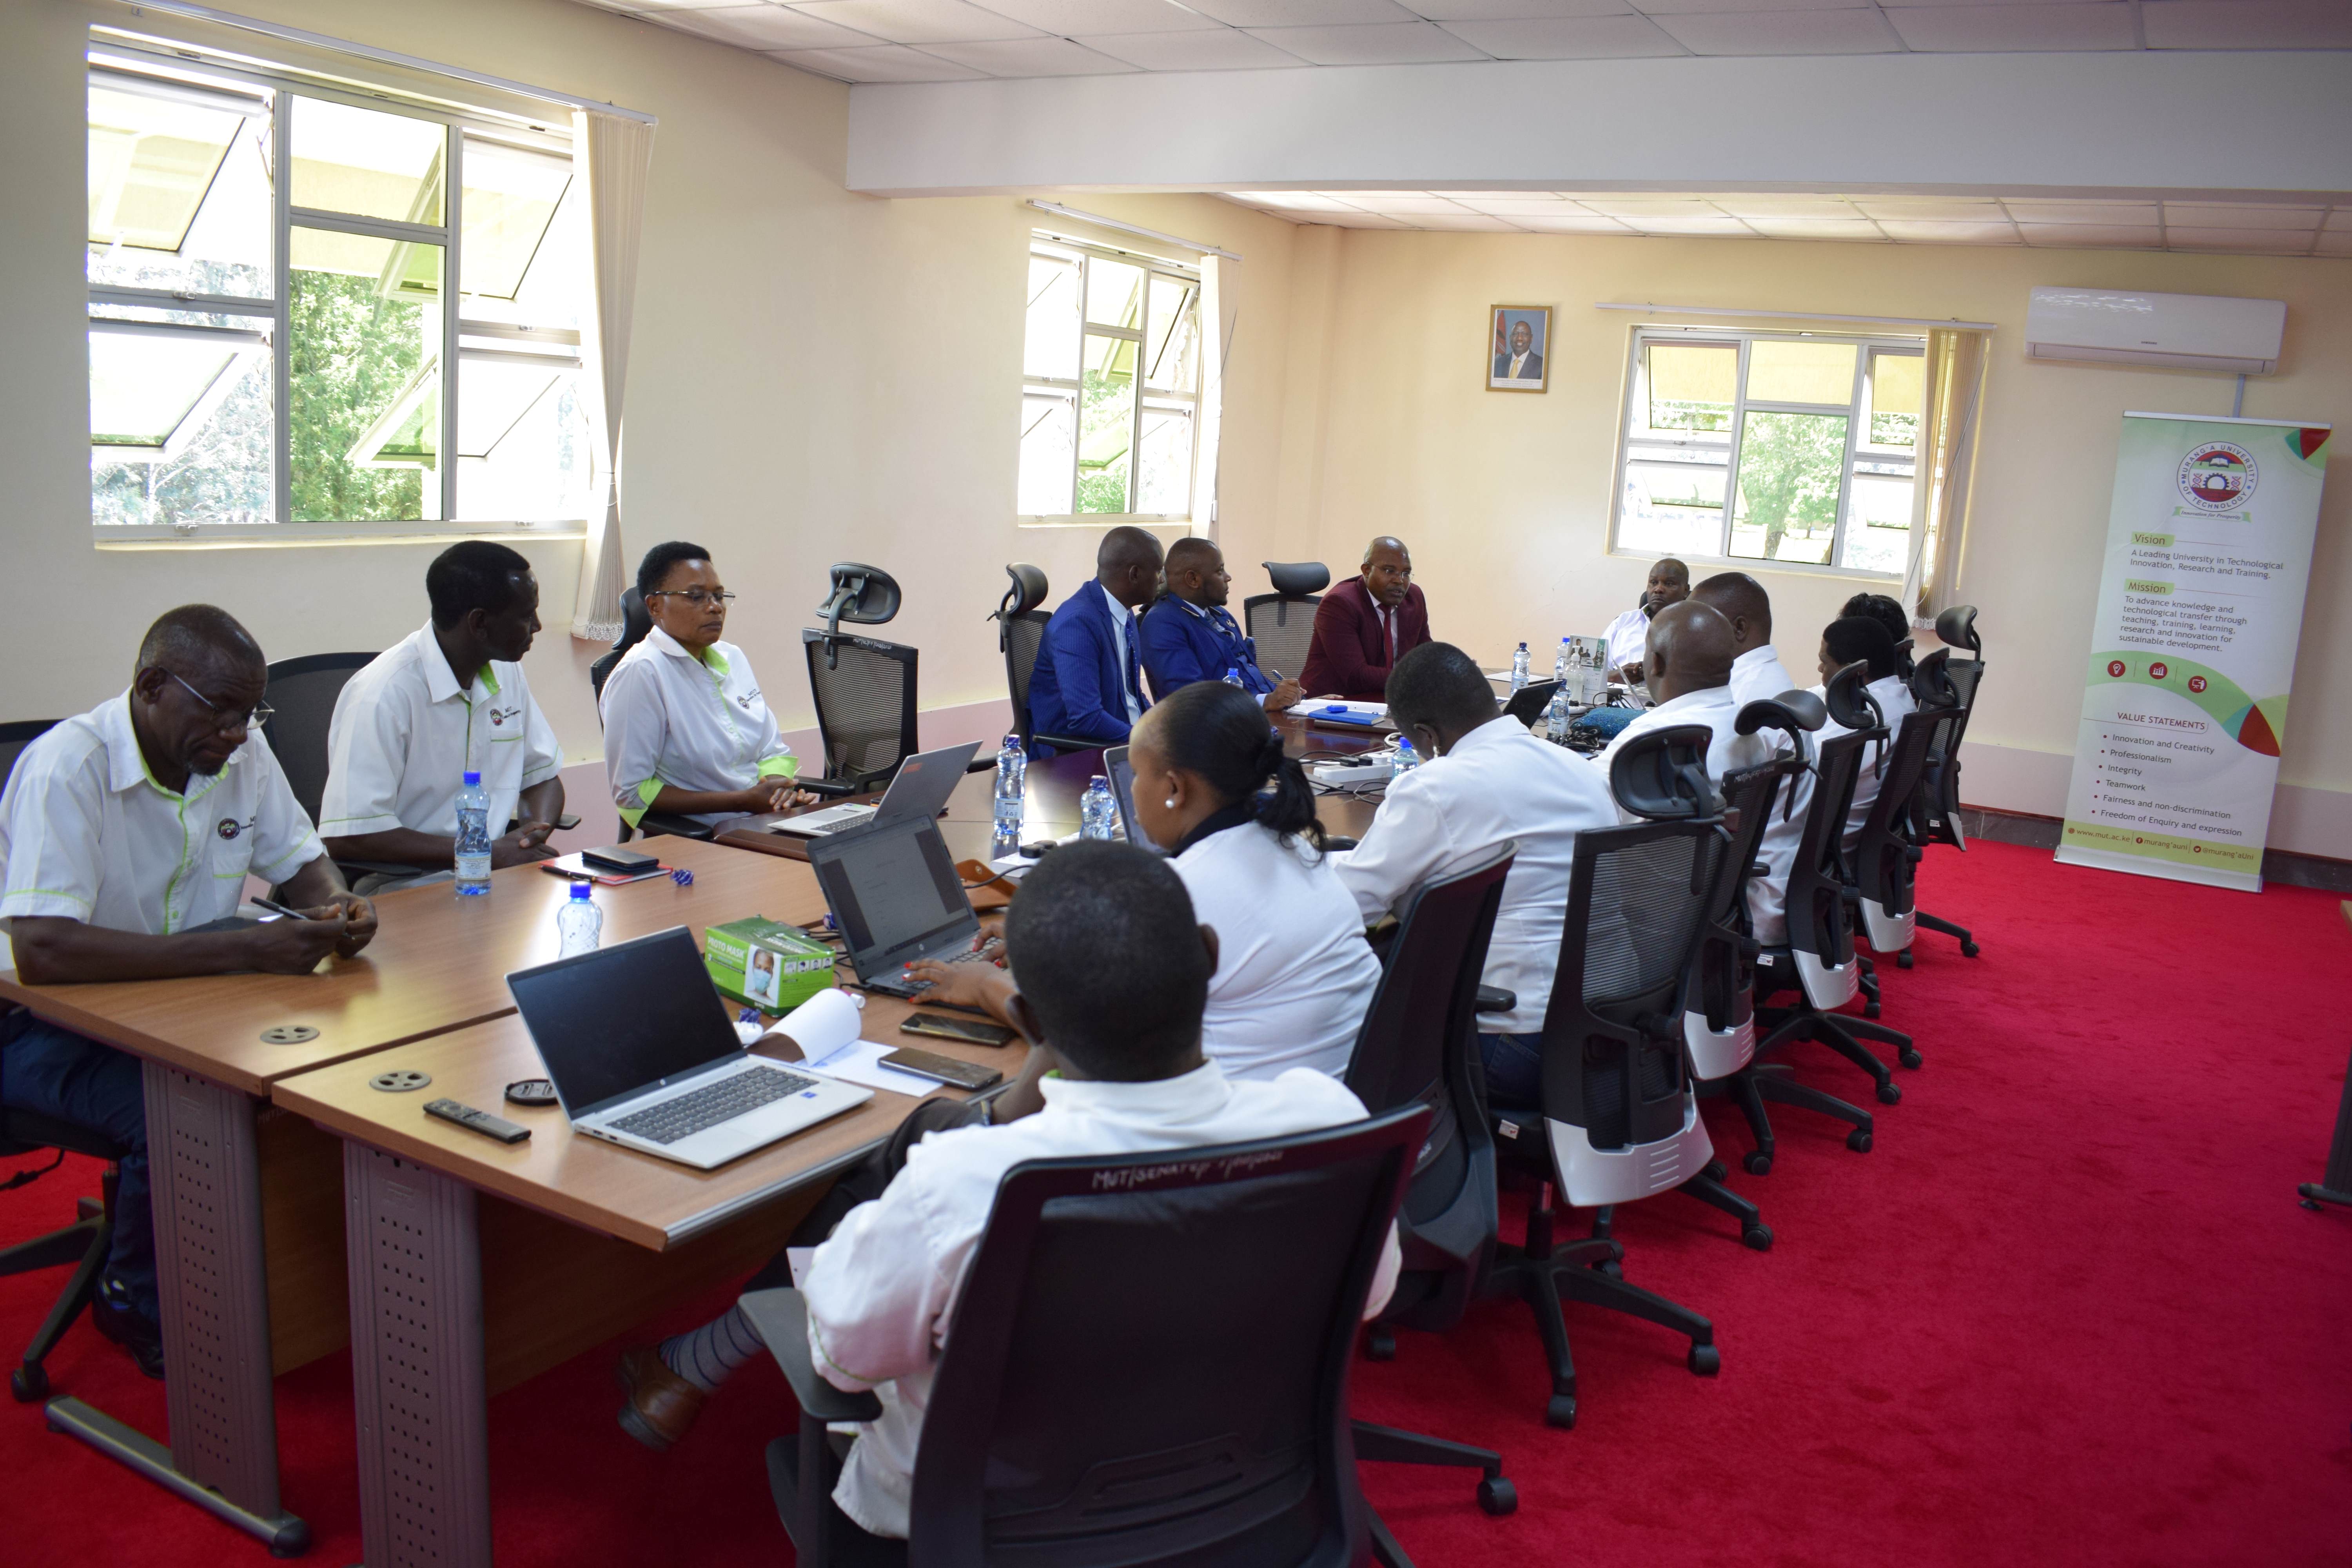 Led by the Managing Director at MUWASCO,the MUWASCO Team met with Murang'a University team to discuss the biogas project partnership and implementation. 